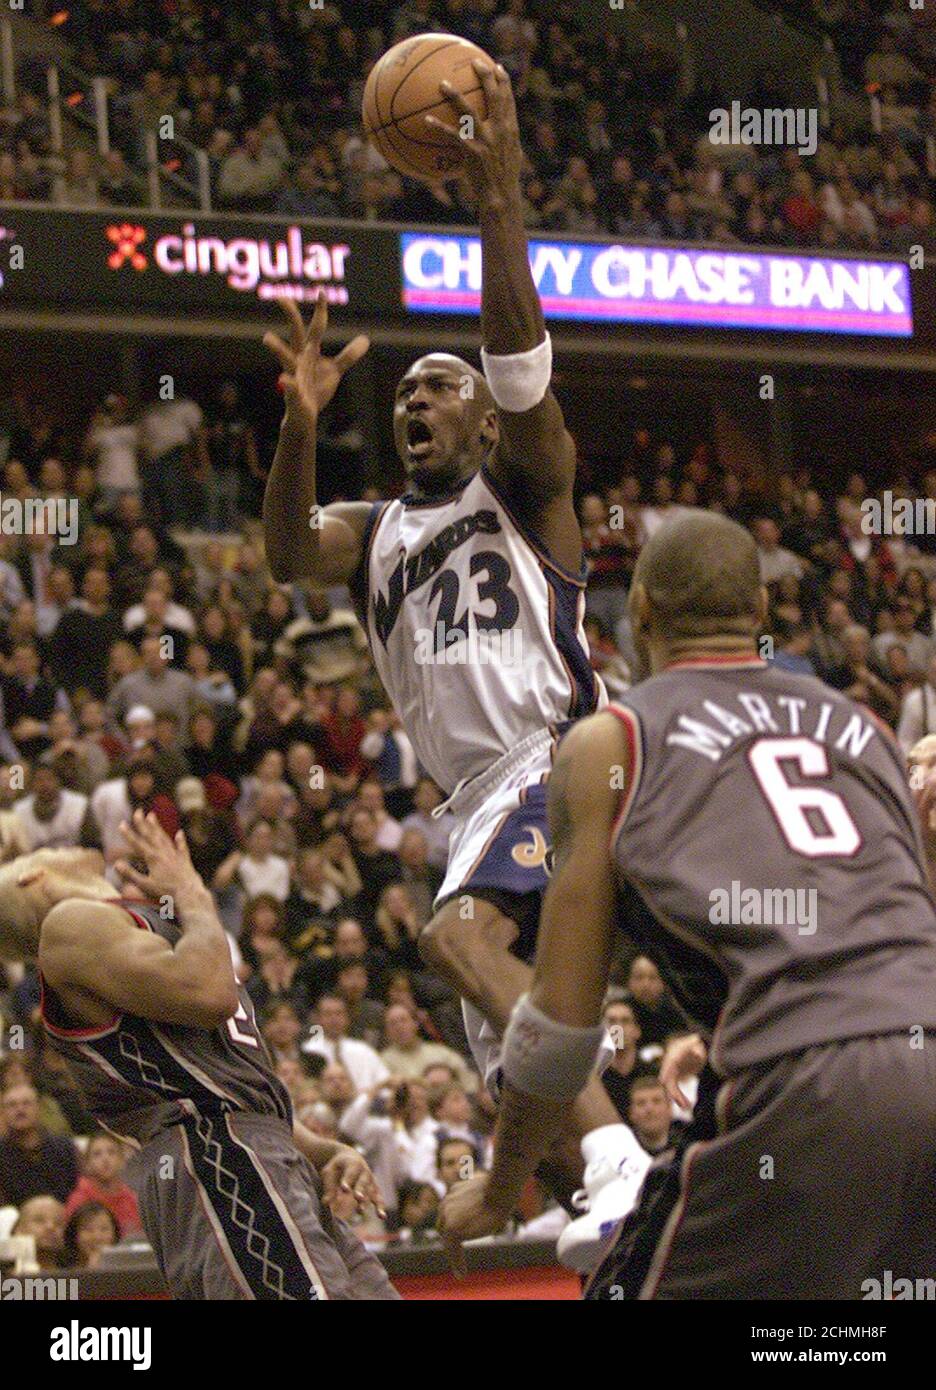 Washington Wizards' guard Michael Jordan (23) goes up for the game winning point against the New Jersey Nets, in the final seconds of the fourth quarter February 21, 2003 at the MCI Center in Washington. Watching Jordan are New Jersey forwards Richard Jefferson (L) and Kenyon Martin (6). Jordan, who turned 40-years-old this week, had 43 points for the evening as the Wizards defeated the Nets, 89-86. REUTERS/Brendan McDermid  BM/HB Stock Photo